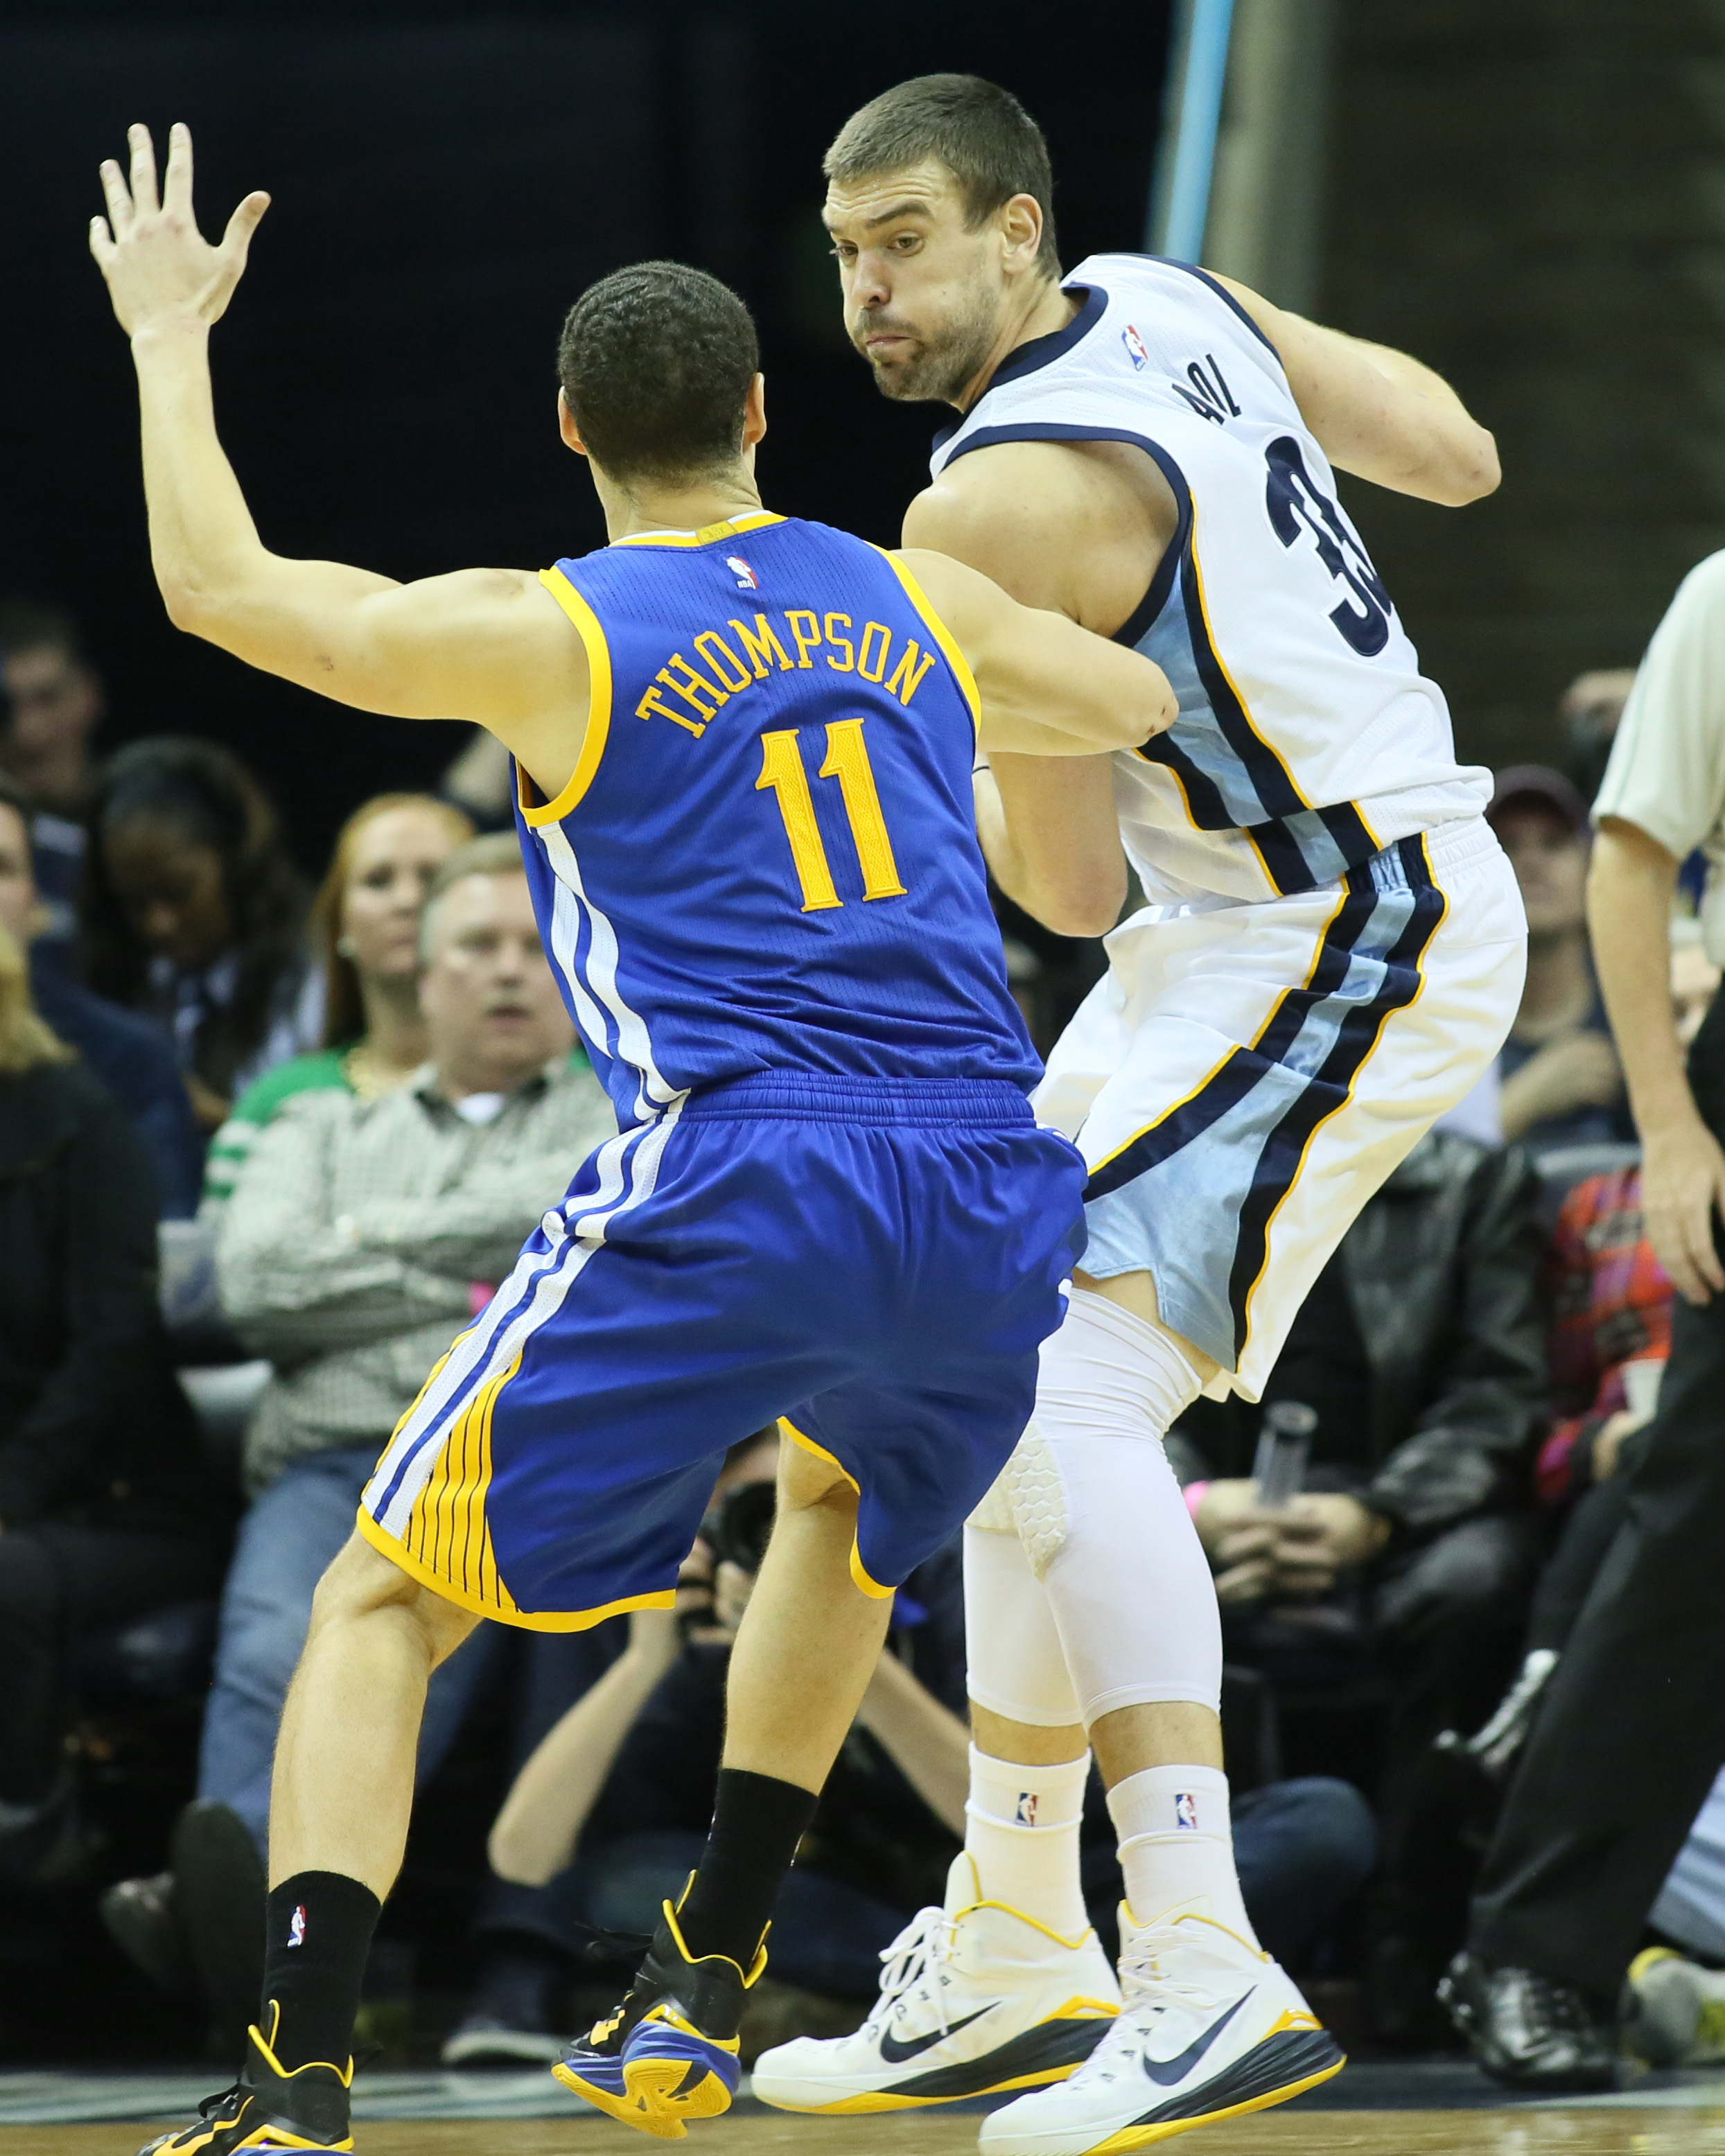 Dec 16, 2014; Memphis, TN, USA; Memphis Grizzlies center Marc Gasol (33) is defended by Golden State Warriors guard Klay Thompson (11) at FedExForum. Grizzlies defeated the Warriors 105-98. (Nelson Chenault-USA TODAY Sports)